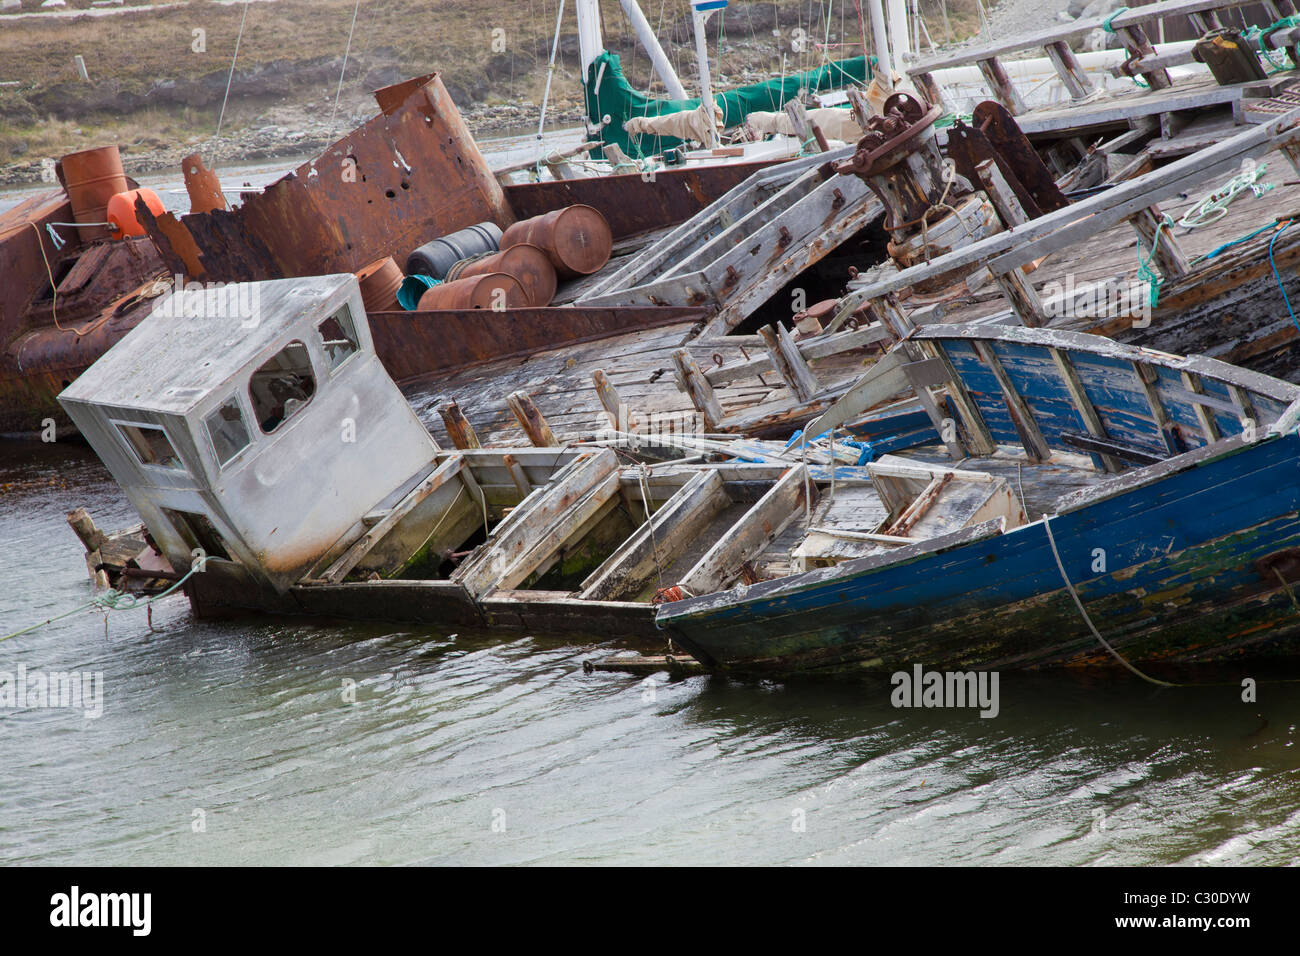 Two wooden shipwrecks at Port Stanley, East Falklands Stock Photo